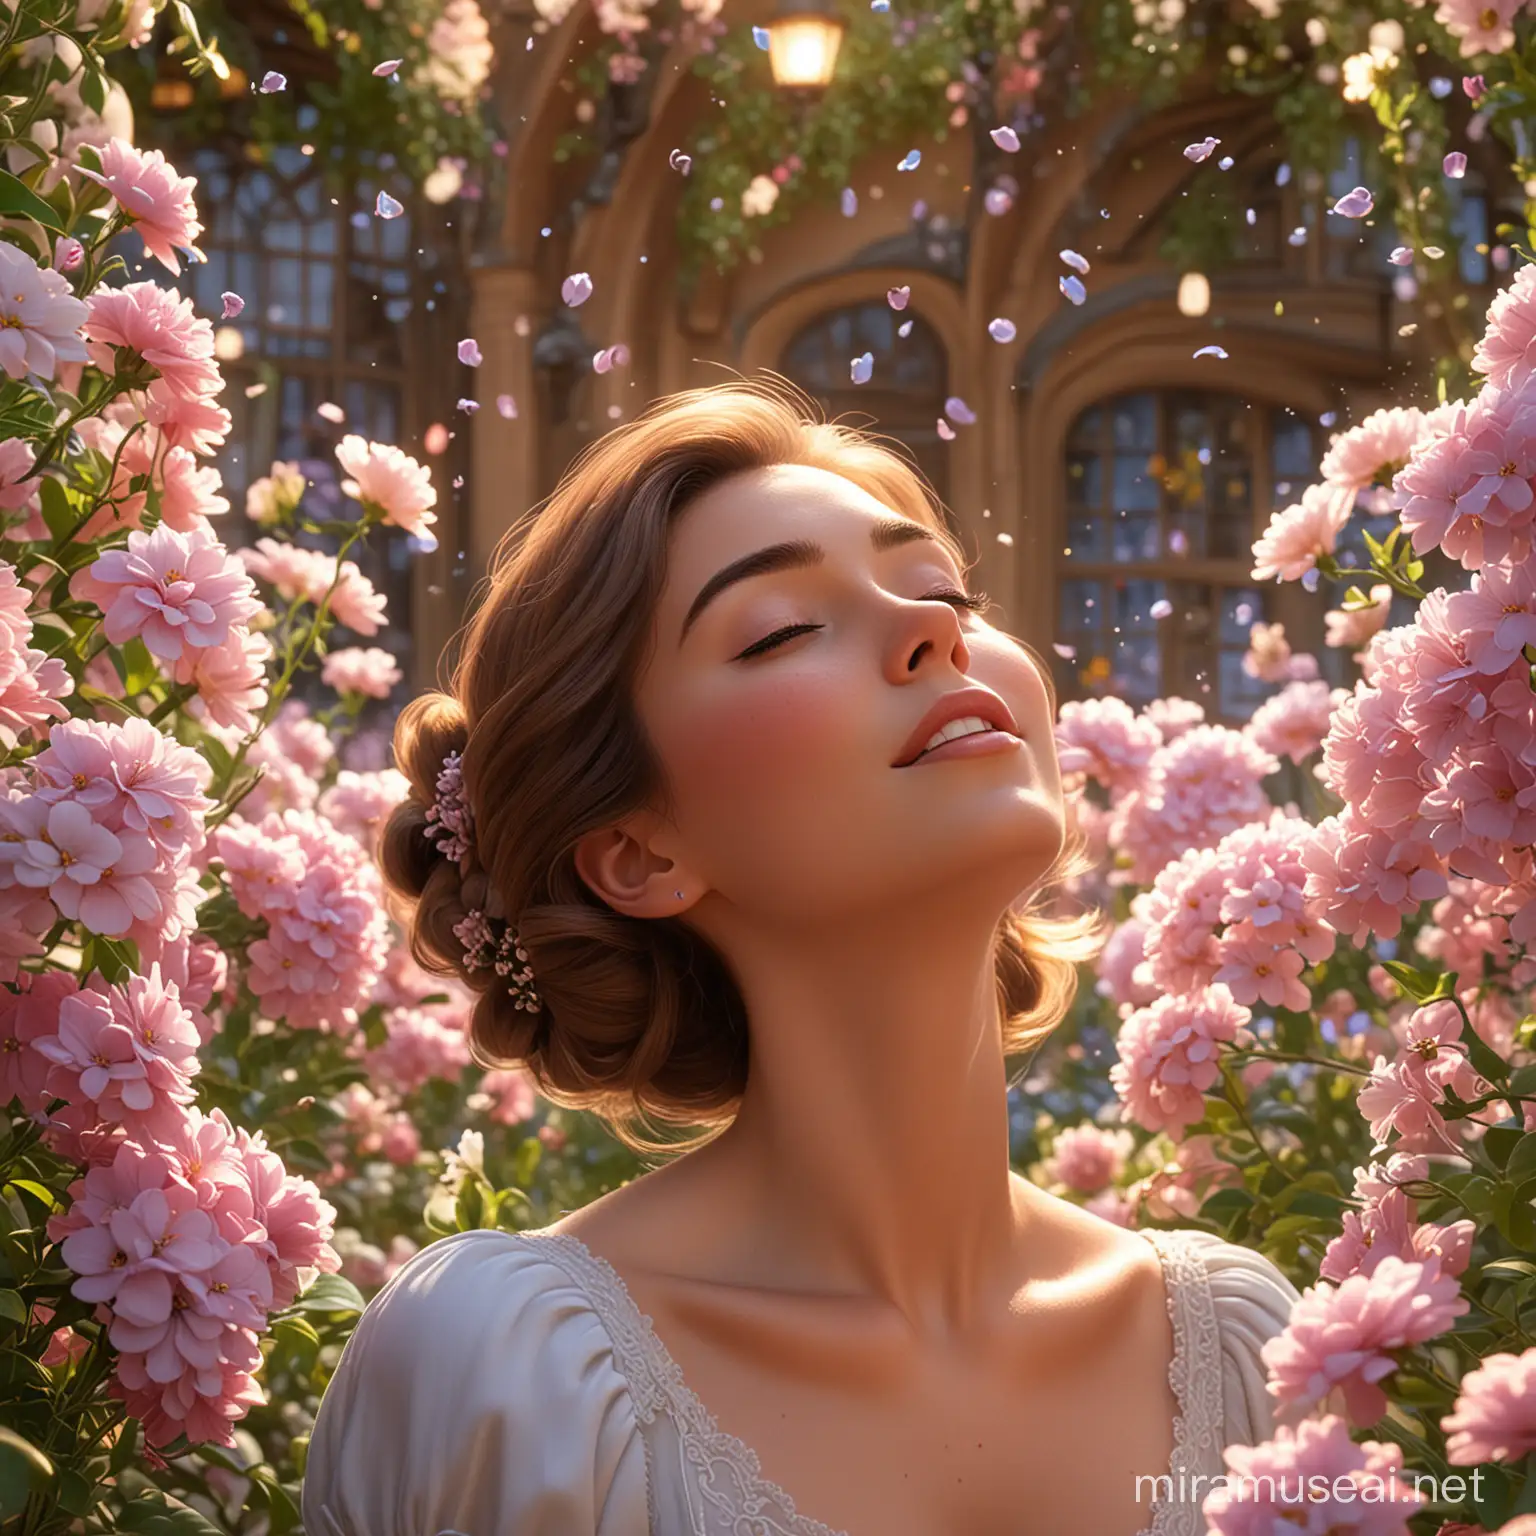 A refined woman, with her eyes closed, is engrossed in the fragrance of flowers,disney pixar style